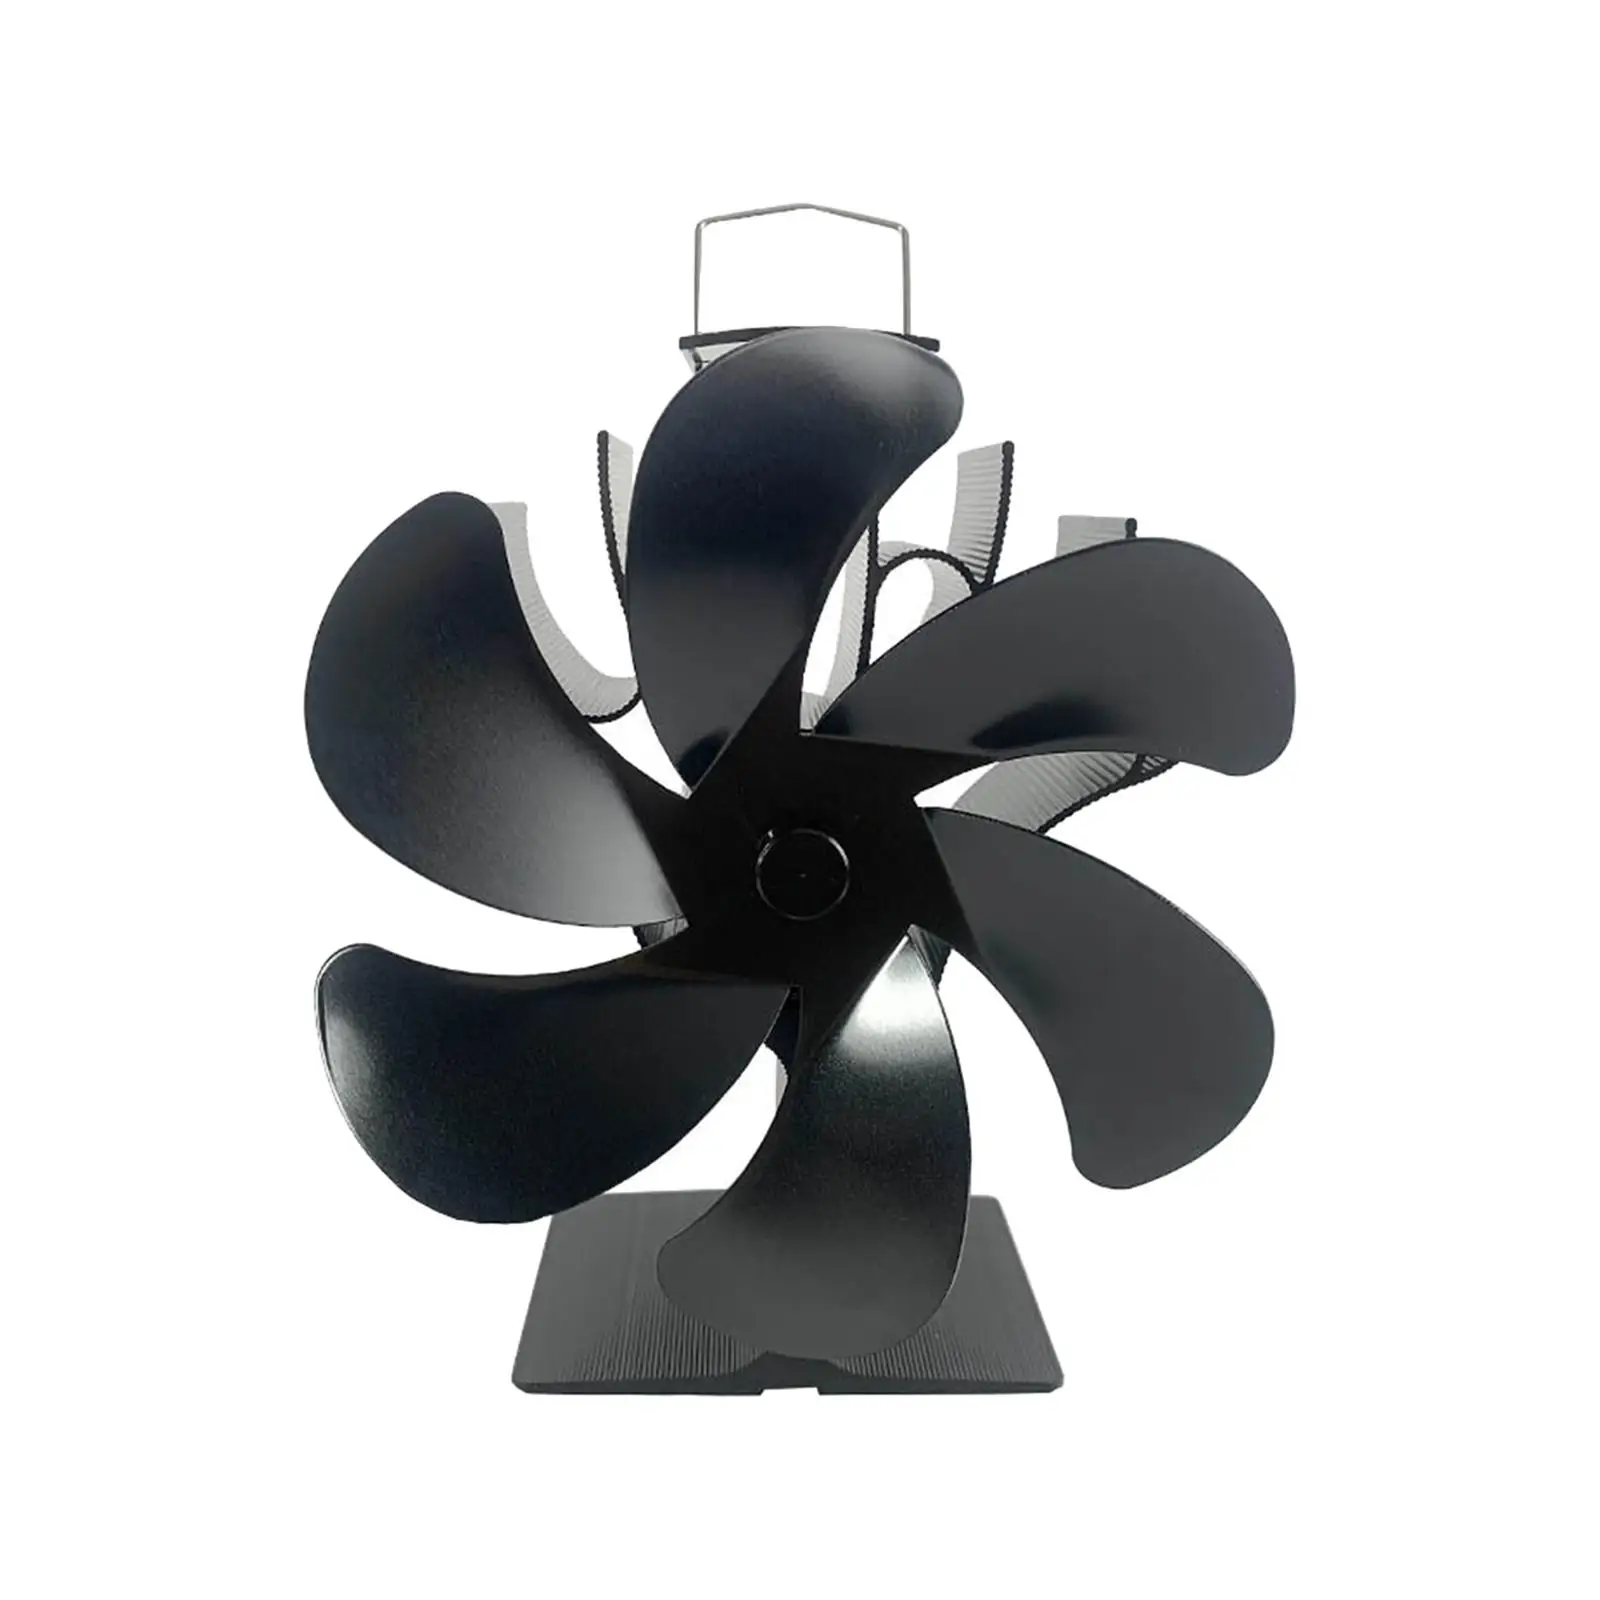 6 Blades Fireplace Fan Powered Stove Fan for Wood Burning Stove Wood Stove Accessories Log Burner Winter Home Picnics